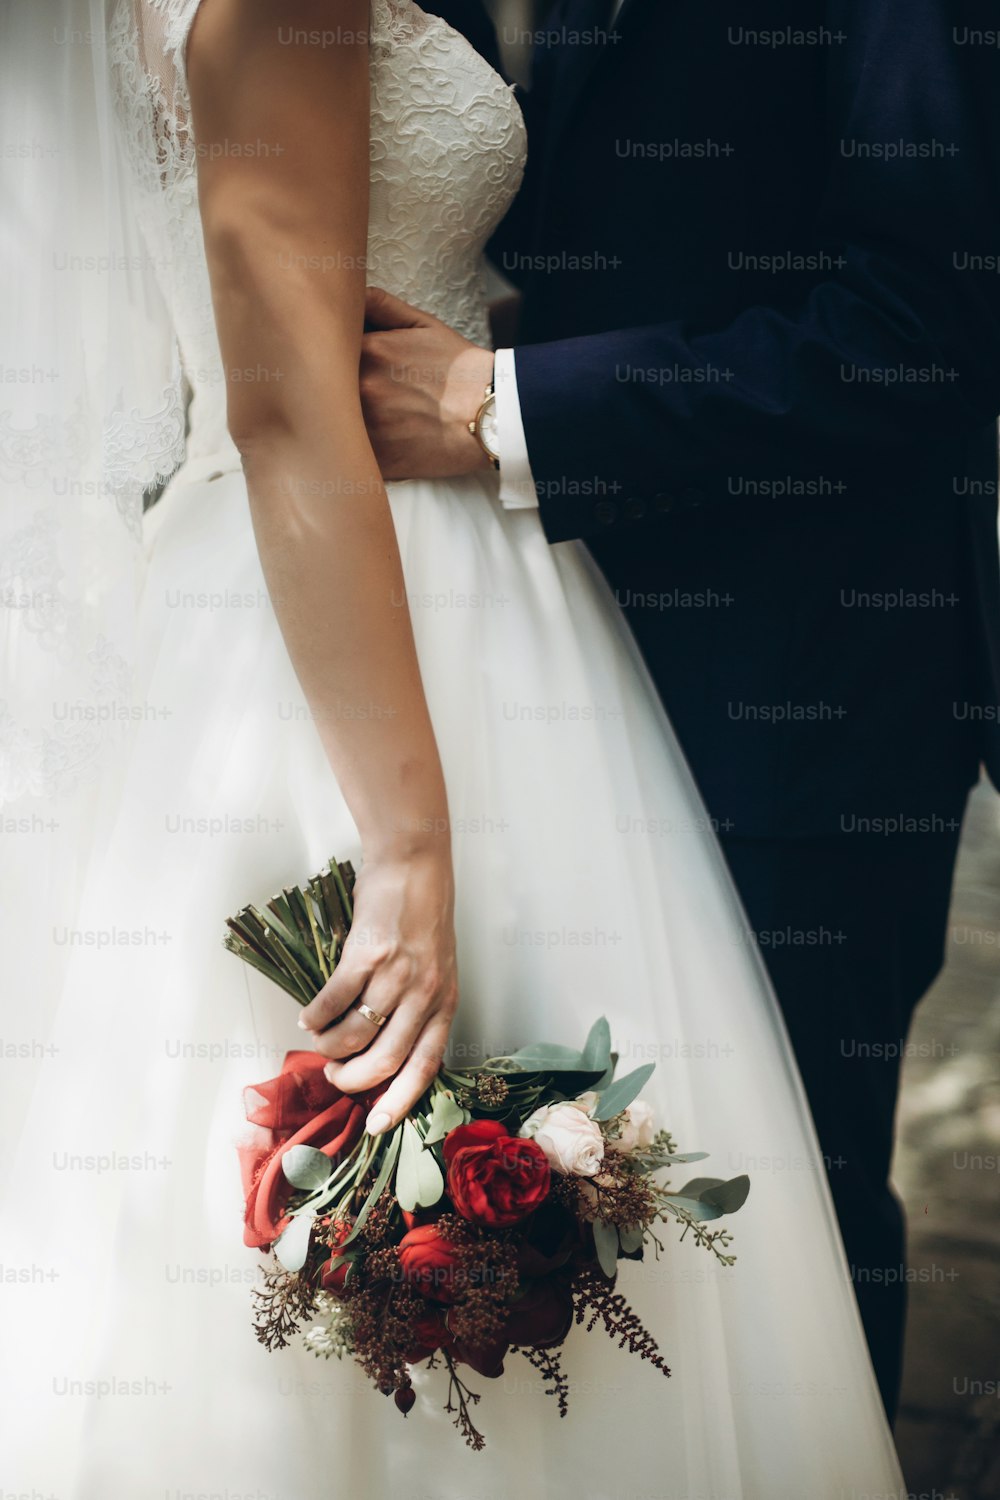 500+ Wedding Pictures  Download Free Images & Stock Photos on Unsplash